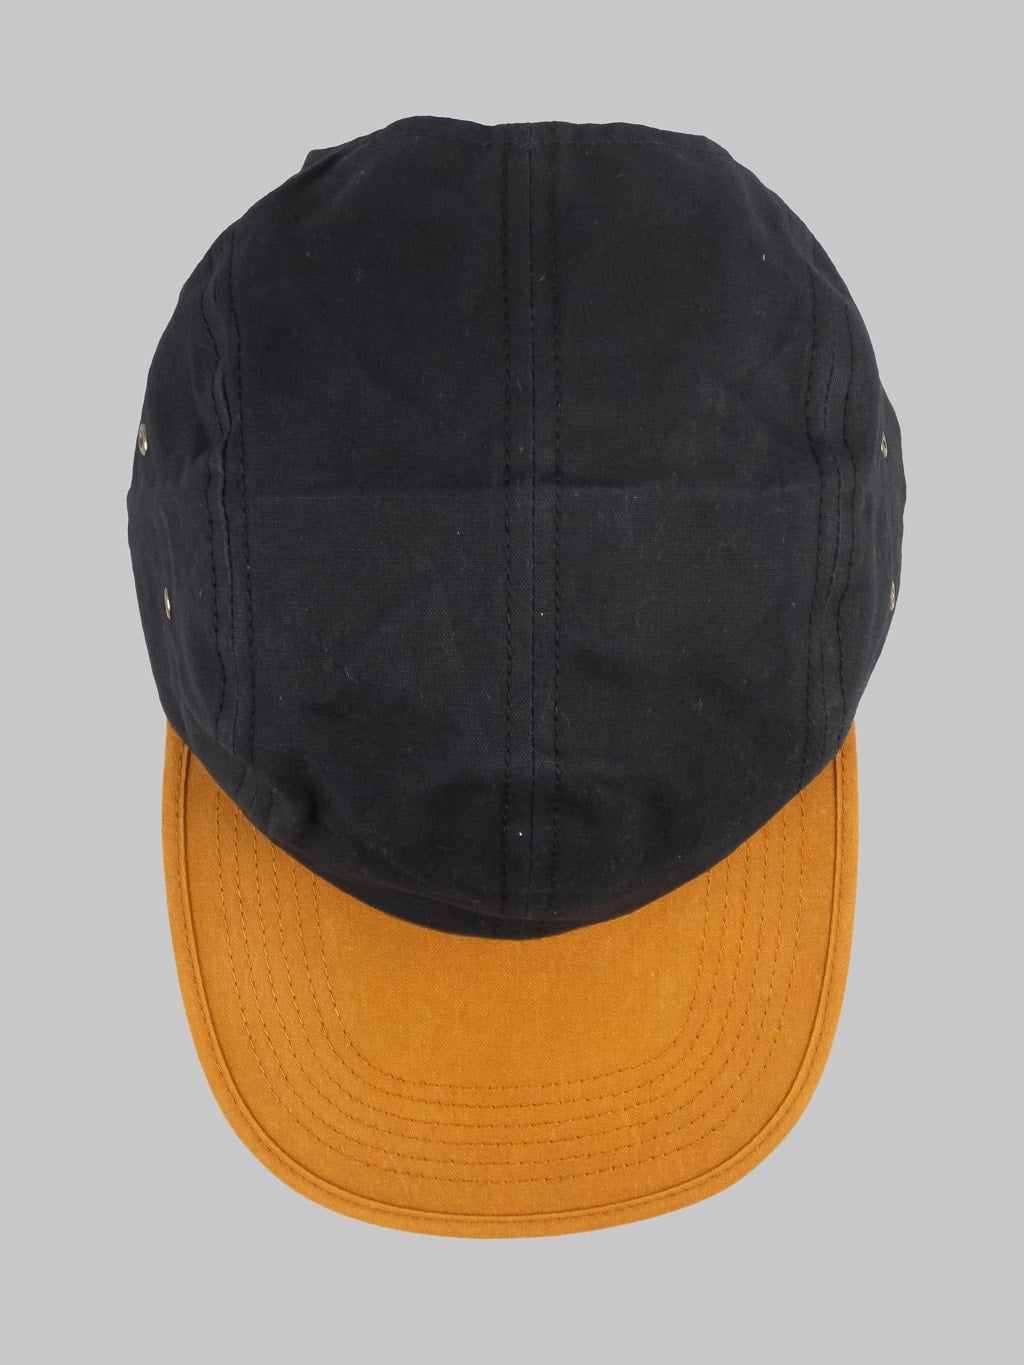 Mighty Shine Paraffin OX 4 Panel Cap Black four panel crown